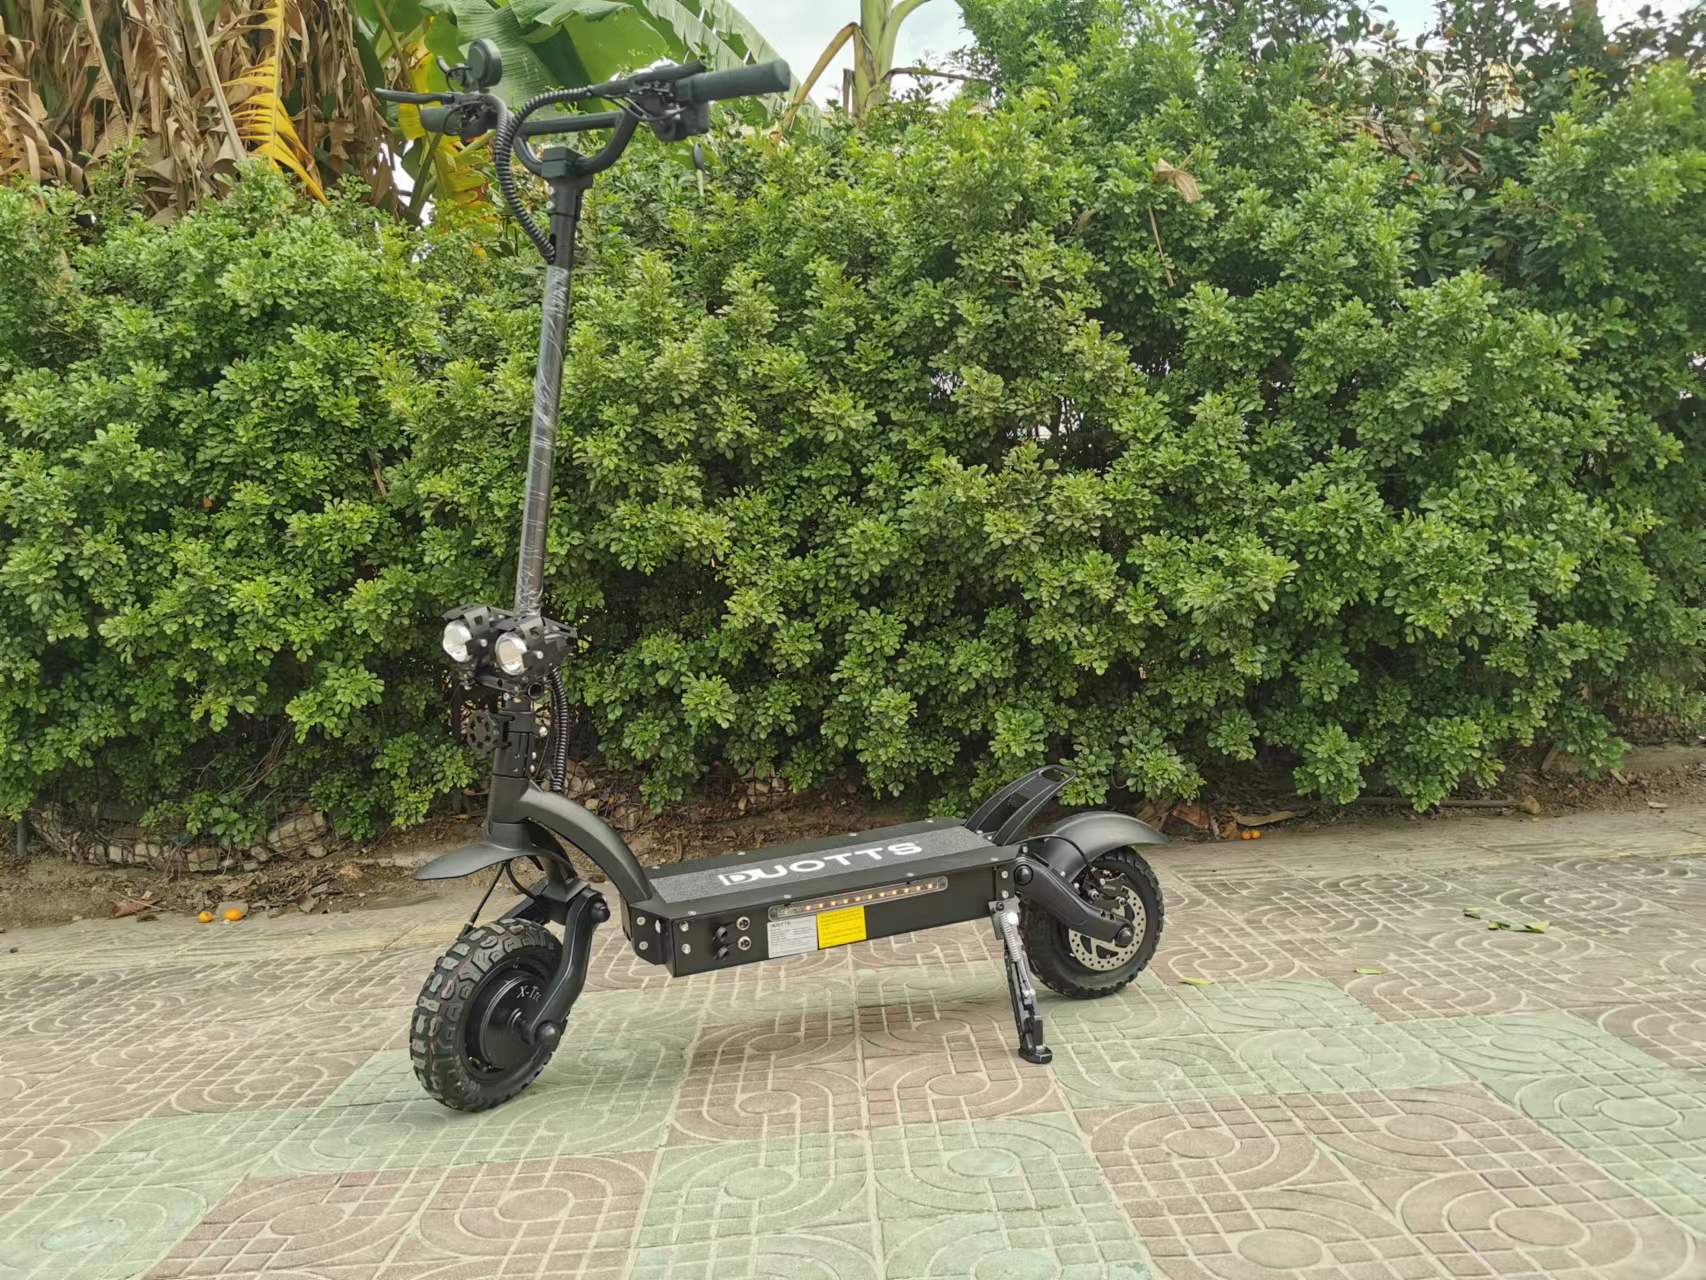 Duotts D20 electric scooter